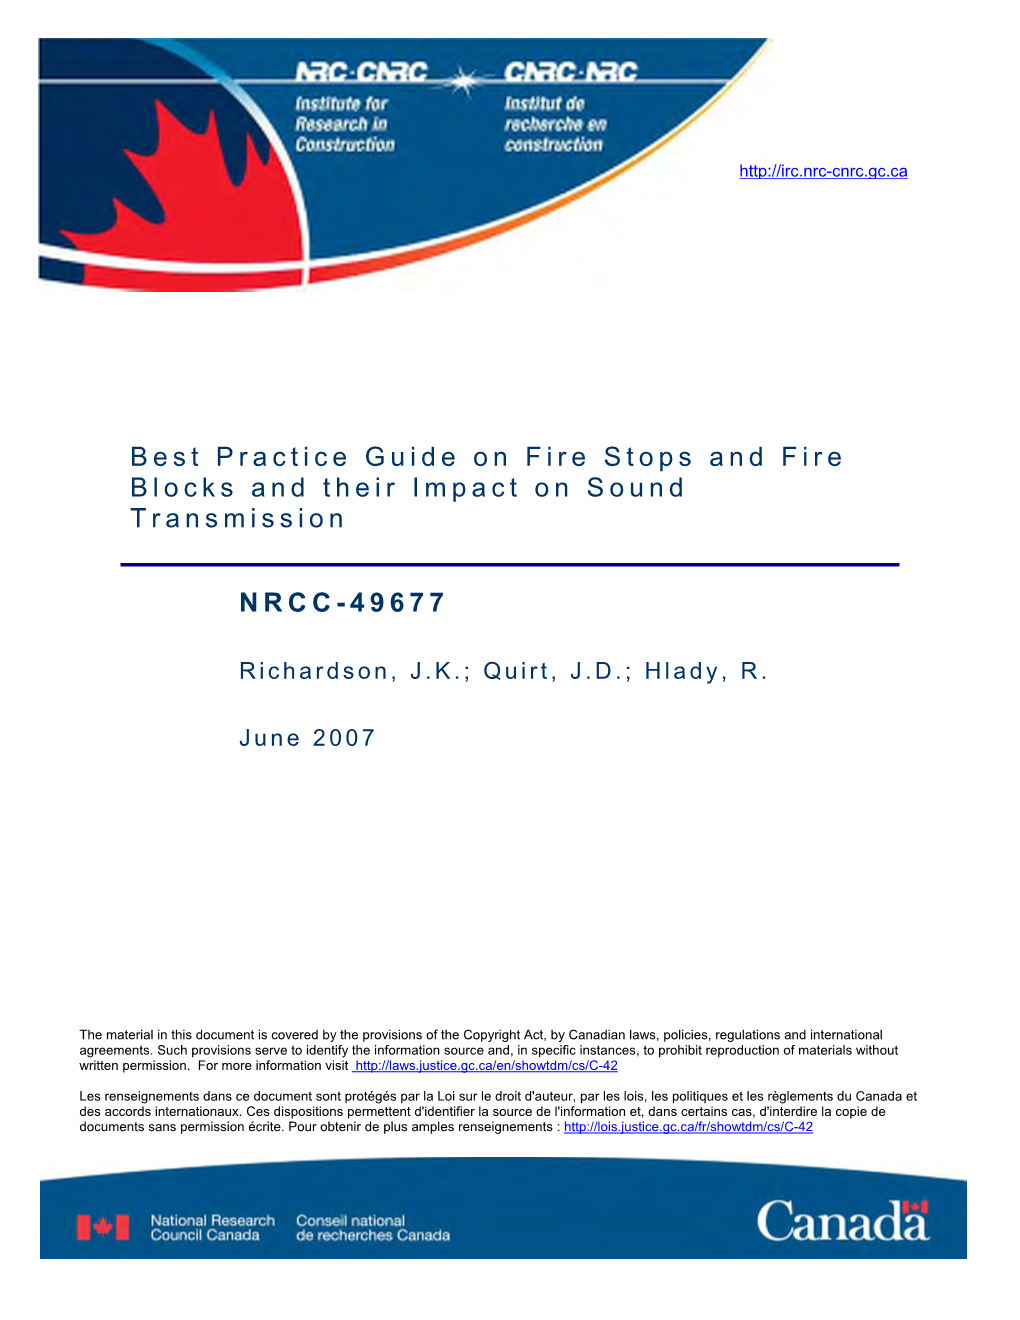 Best Practice Guide on Fire Stops and Fire Blocks and Their Impact on Sound Transmission